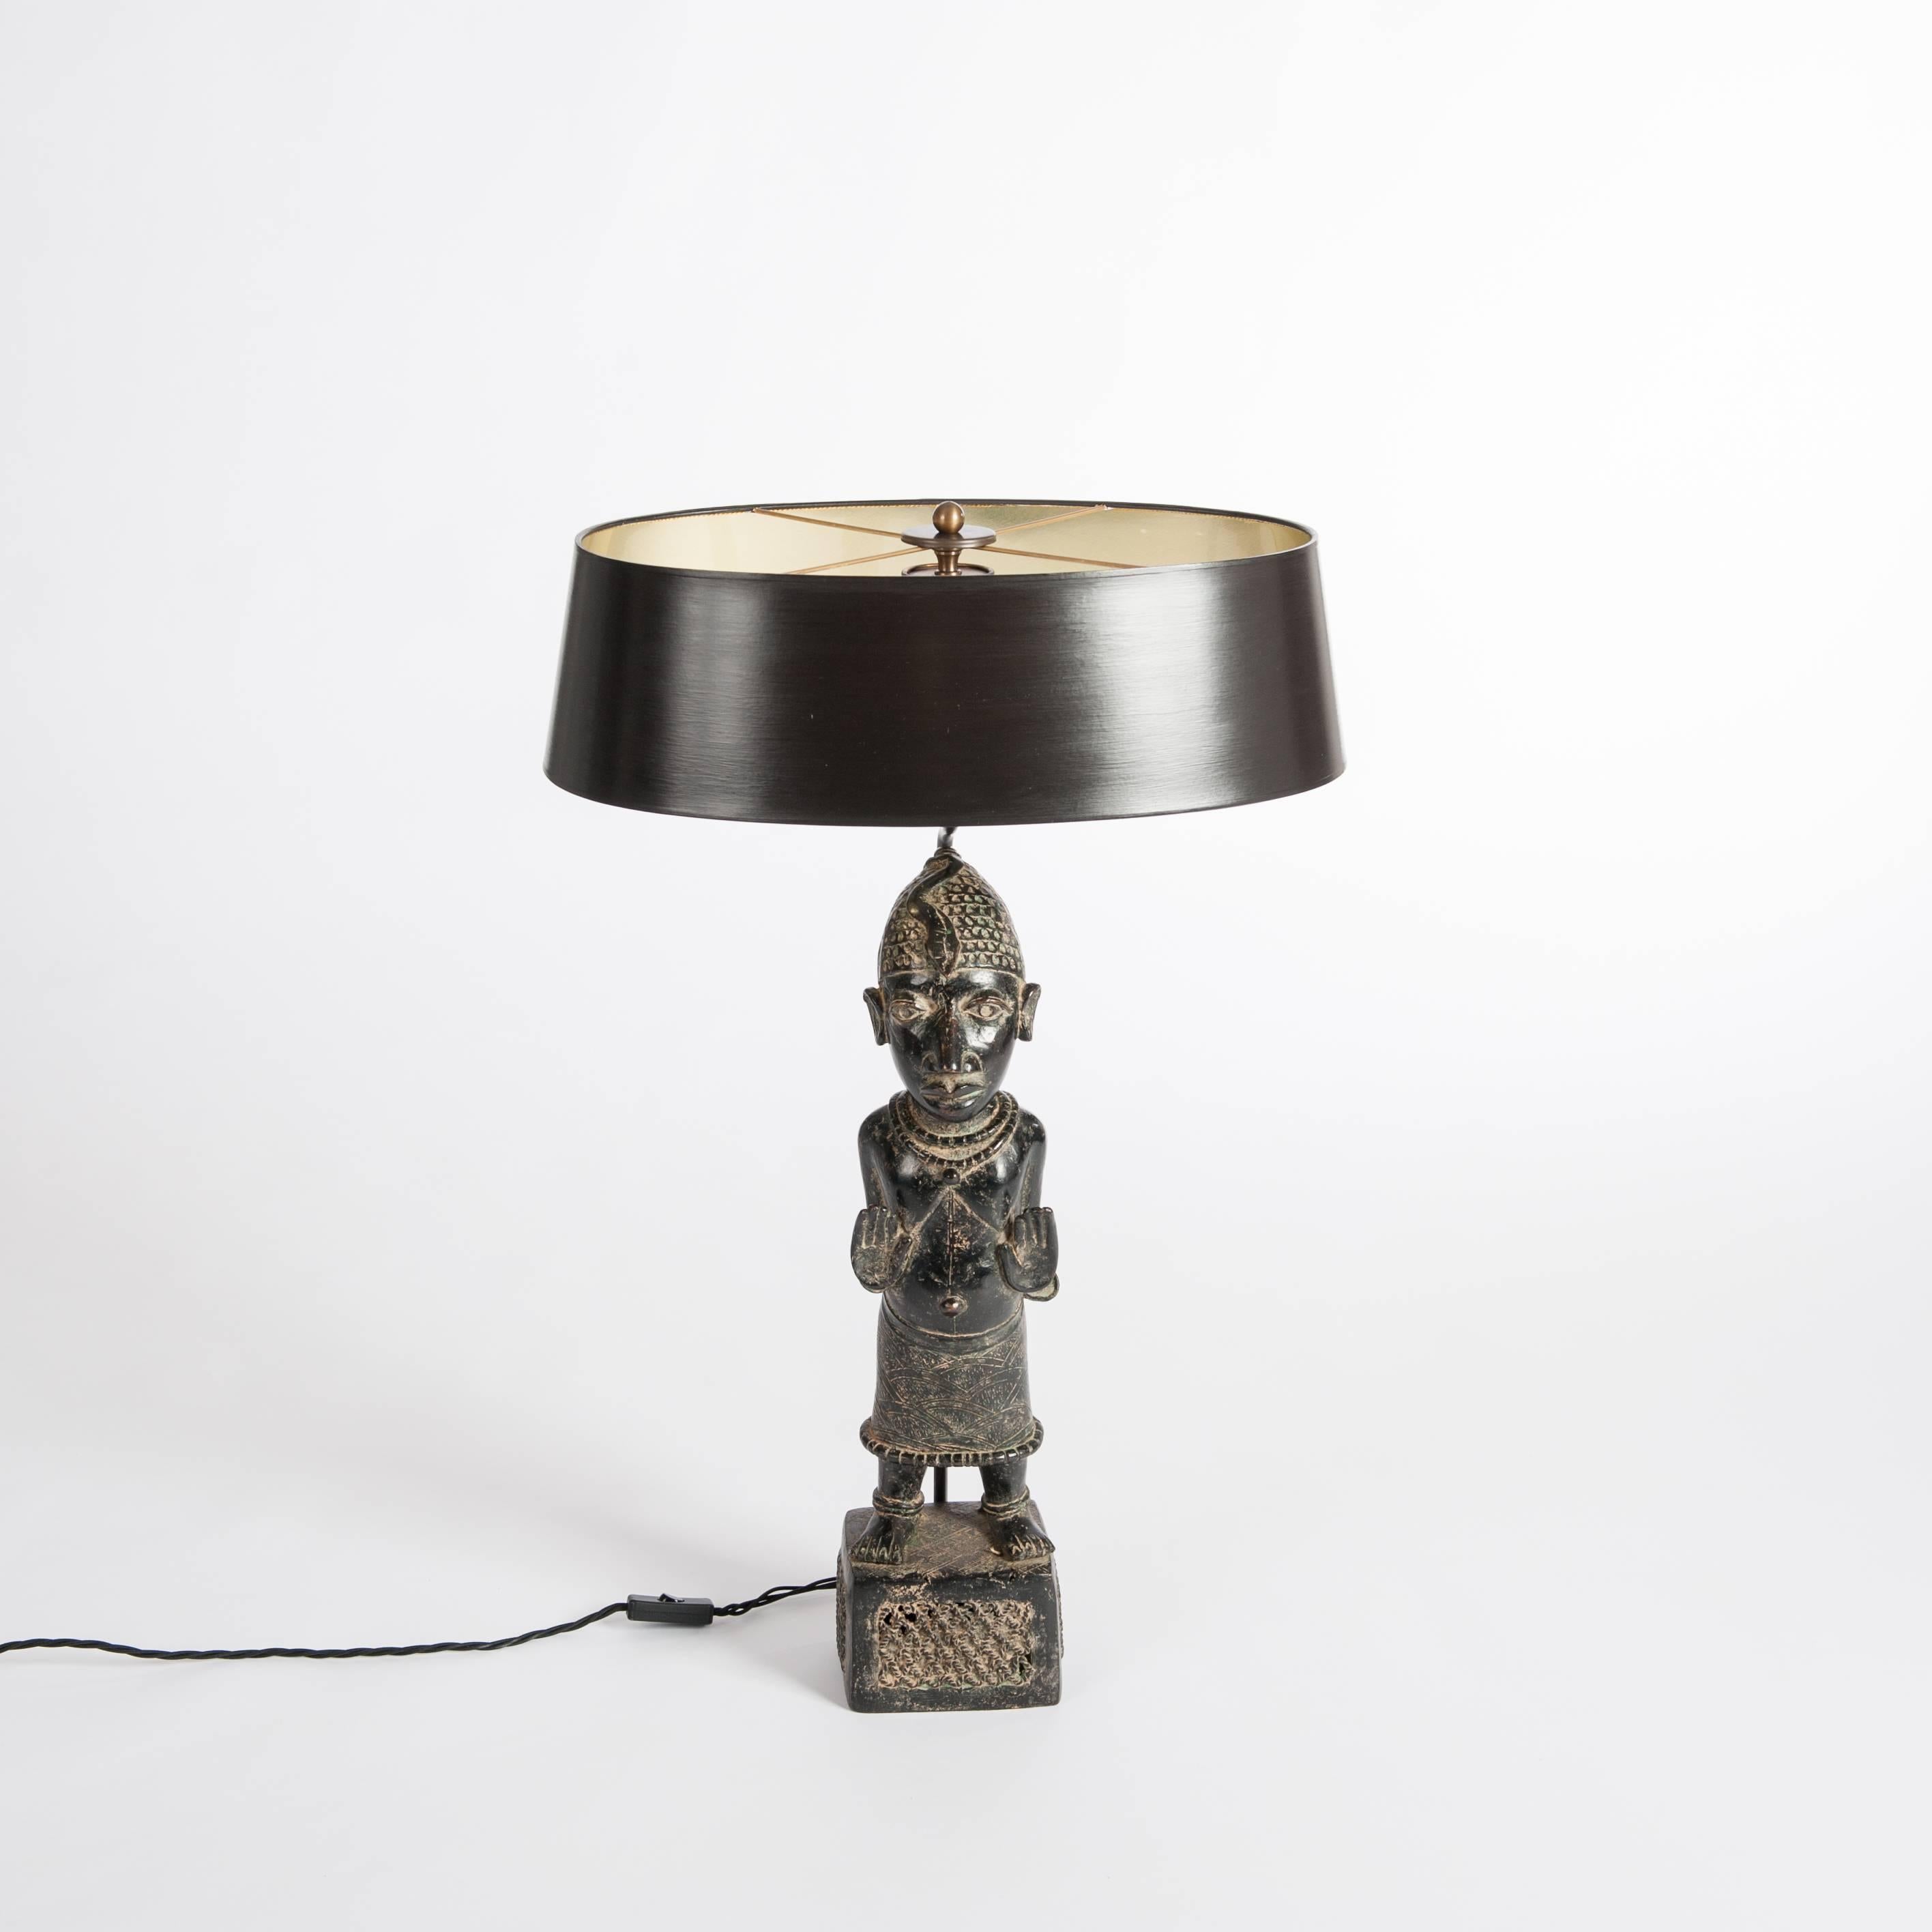 A very fine black-beige 20th African bronze from Benin. 
This extraordinary sculpture with lovely patina combined with an oval
hand-painted lampshade in black-brown - purpose built bronze lamp construction.